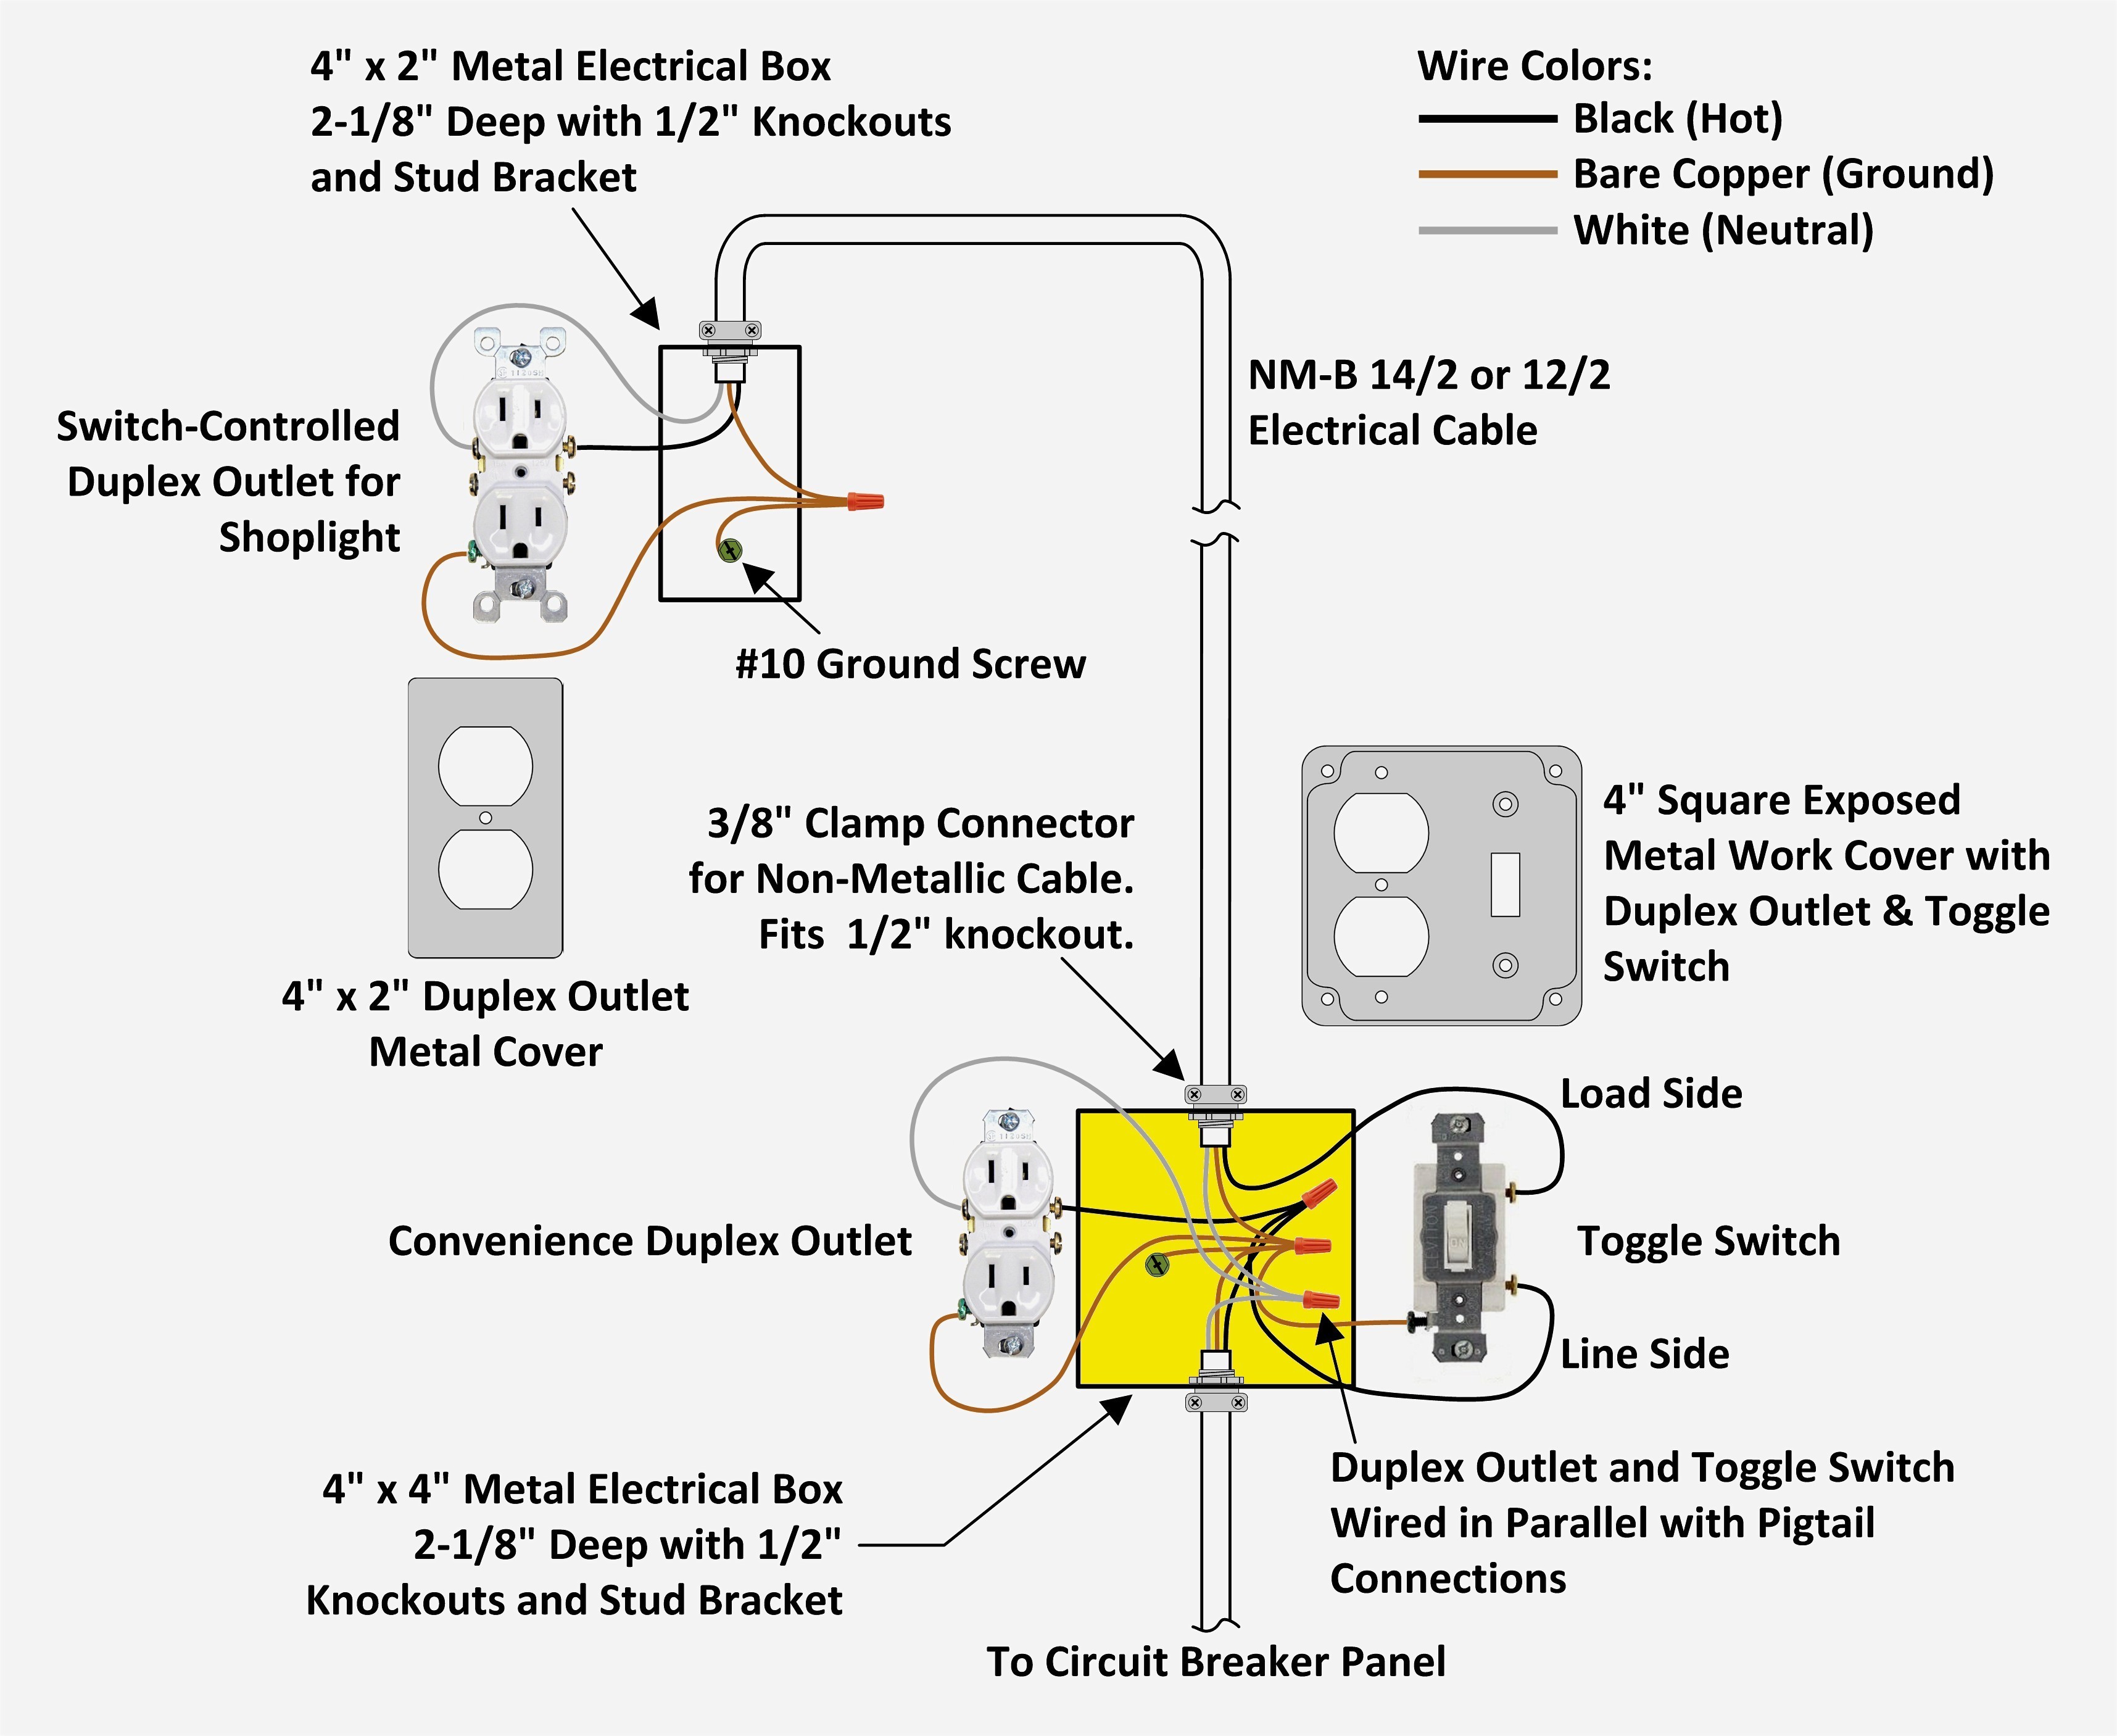 Wiring Diagram For Single Pole Switch With Pilot Light Refrence